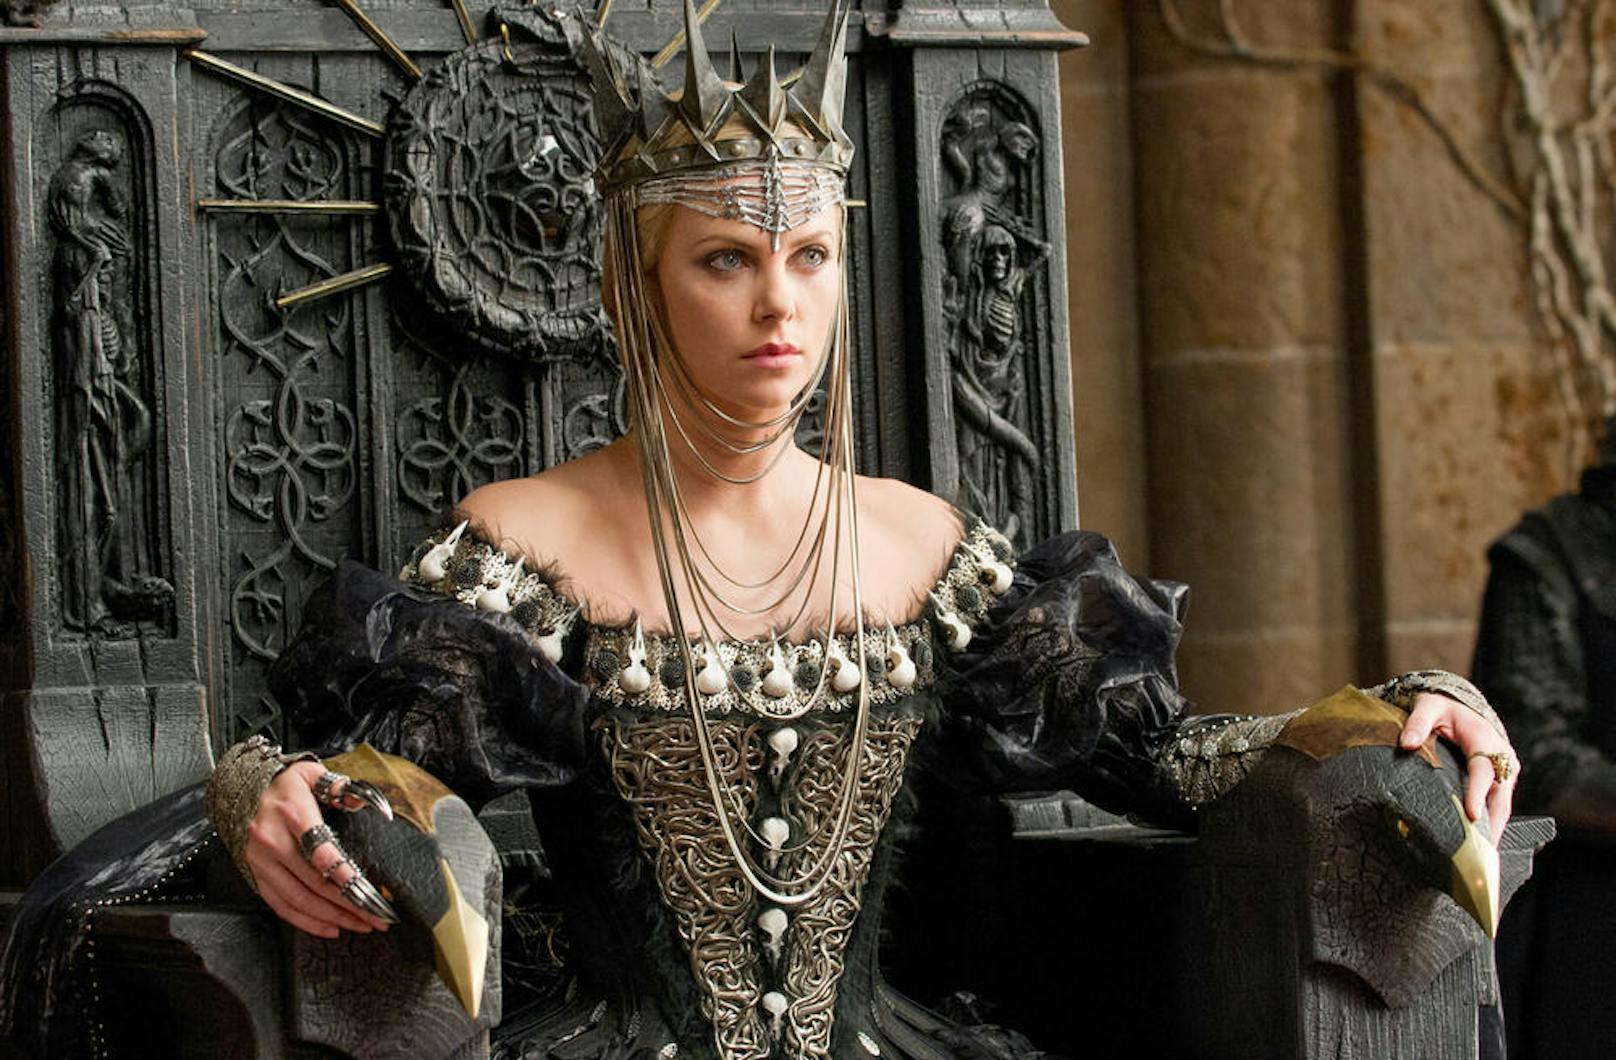 Charlize Theron in "Snow White & The Huntsman"